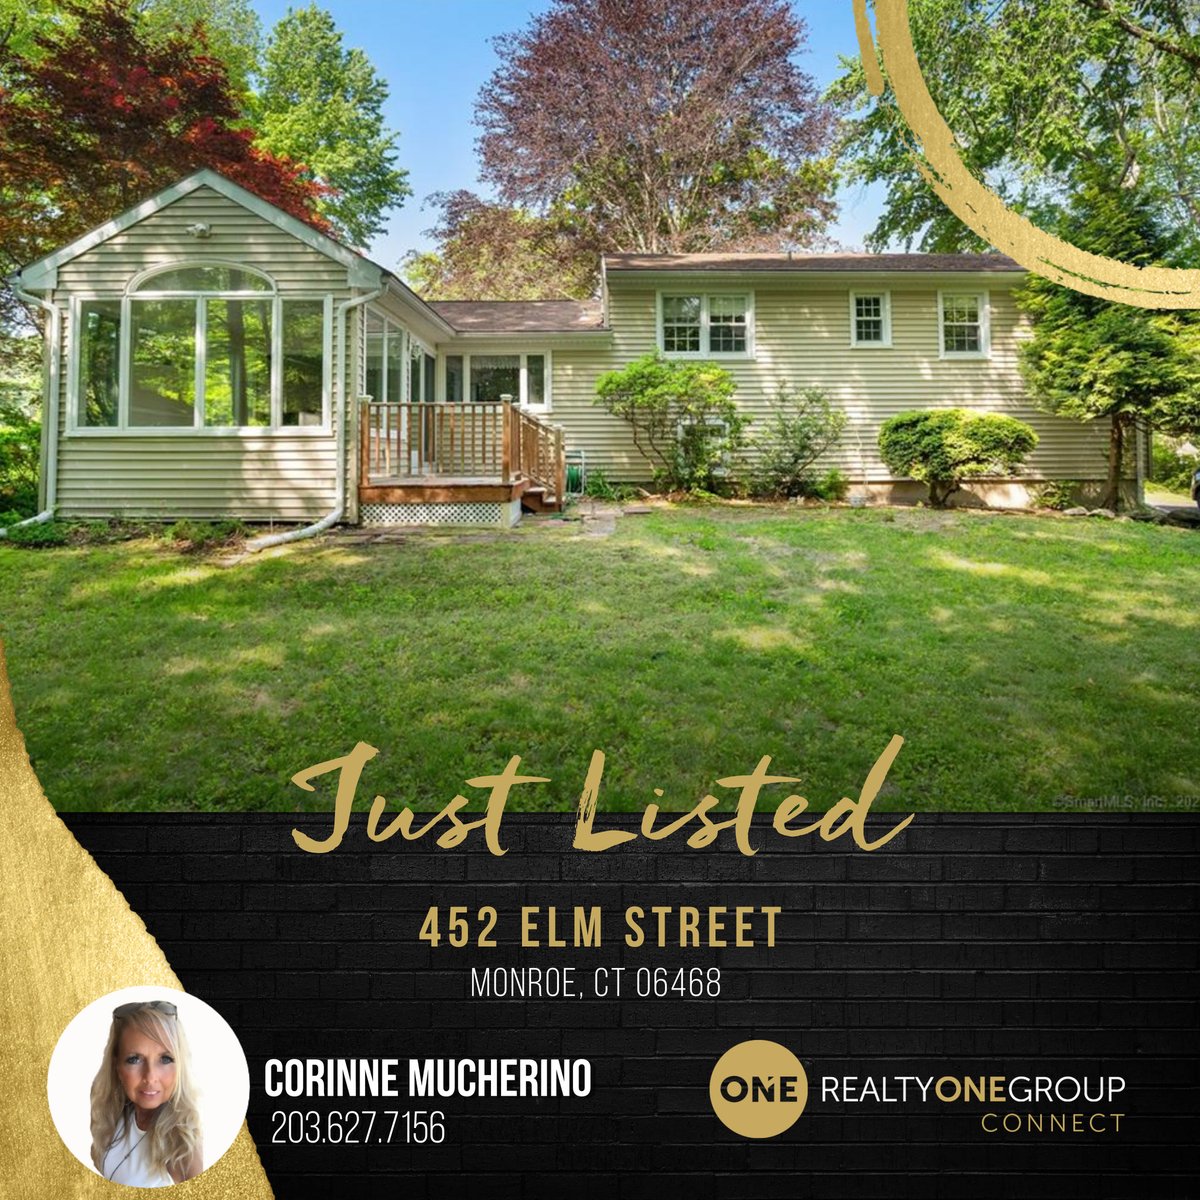 Another ONE Listed by Corinne Mucherino! Congrats to you & your clients! ☝️🙌
Connect with Corinne for more information or to tour this property.#JustListed #Realestate #Monroe #rogconnect #one #Openingdoors facebook.com/36650810684502…